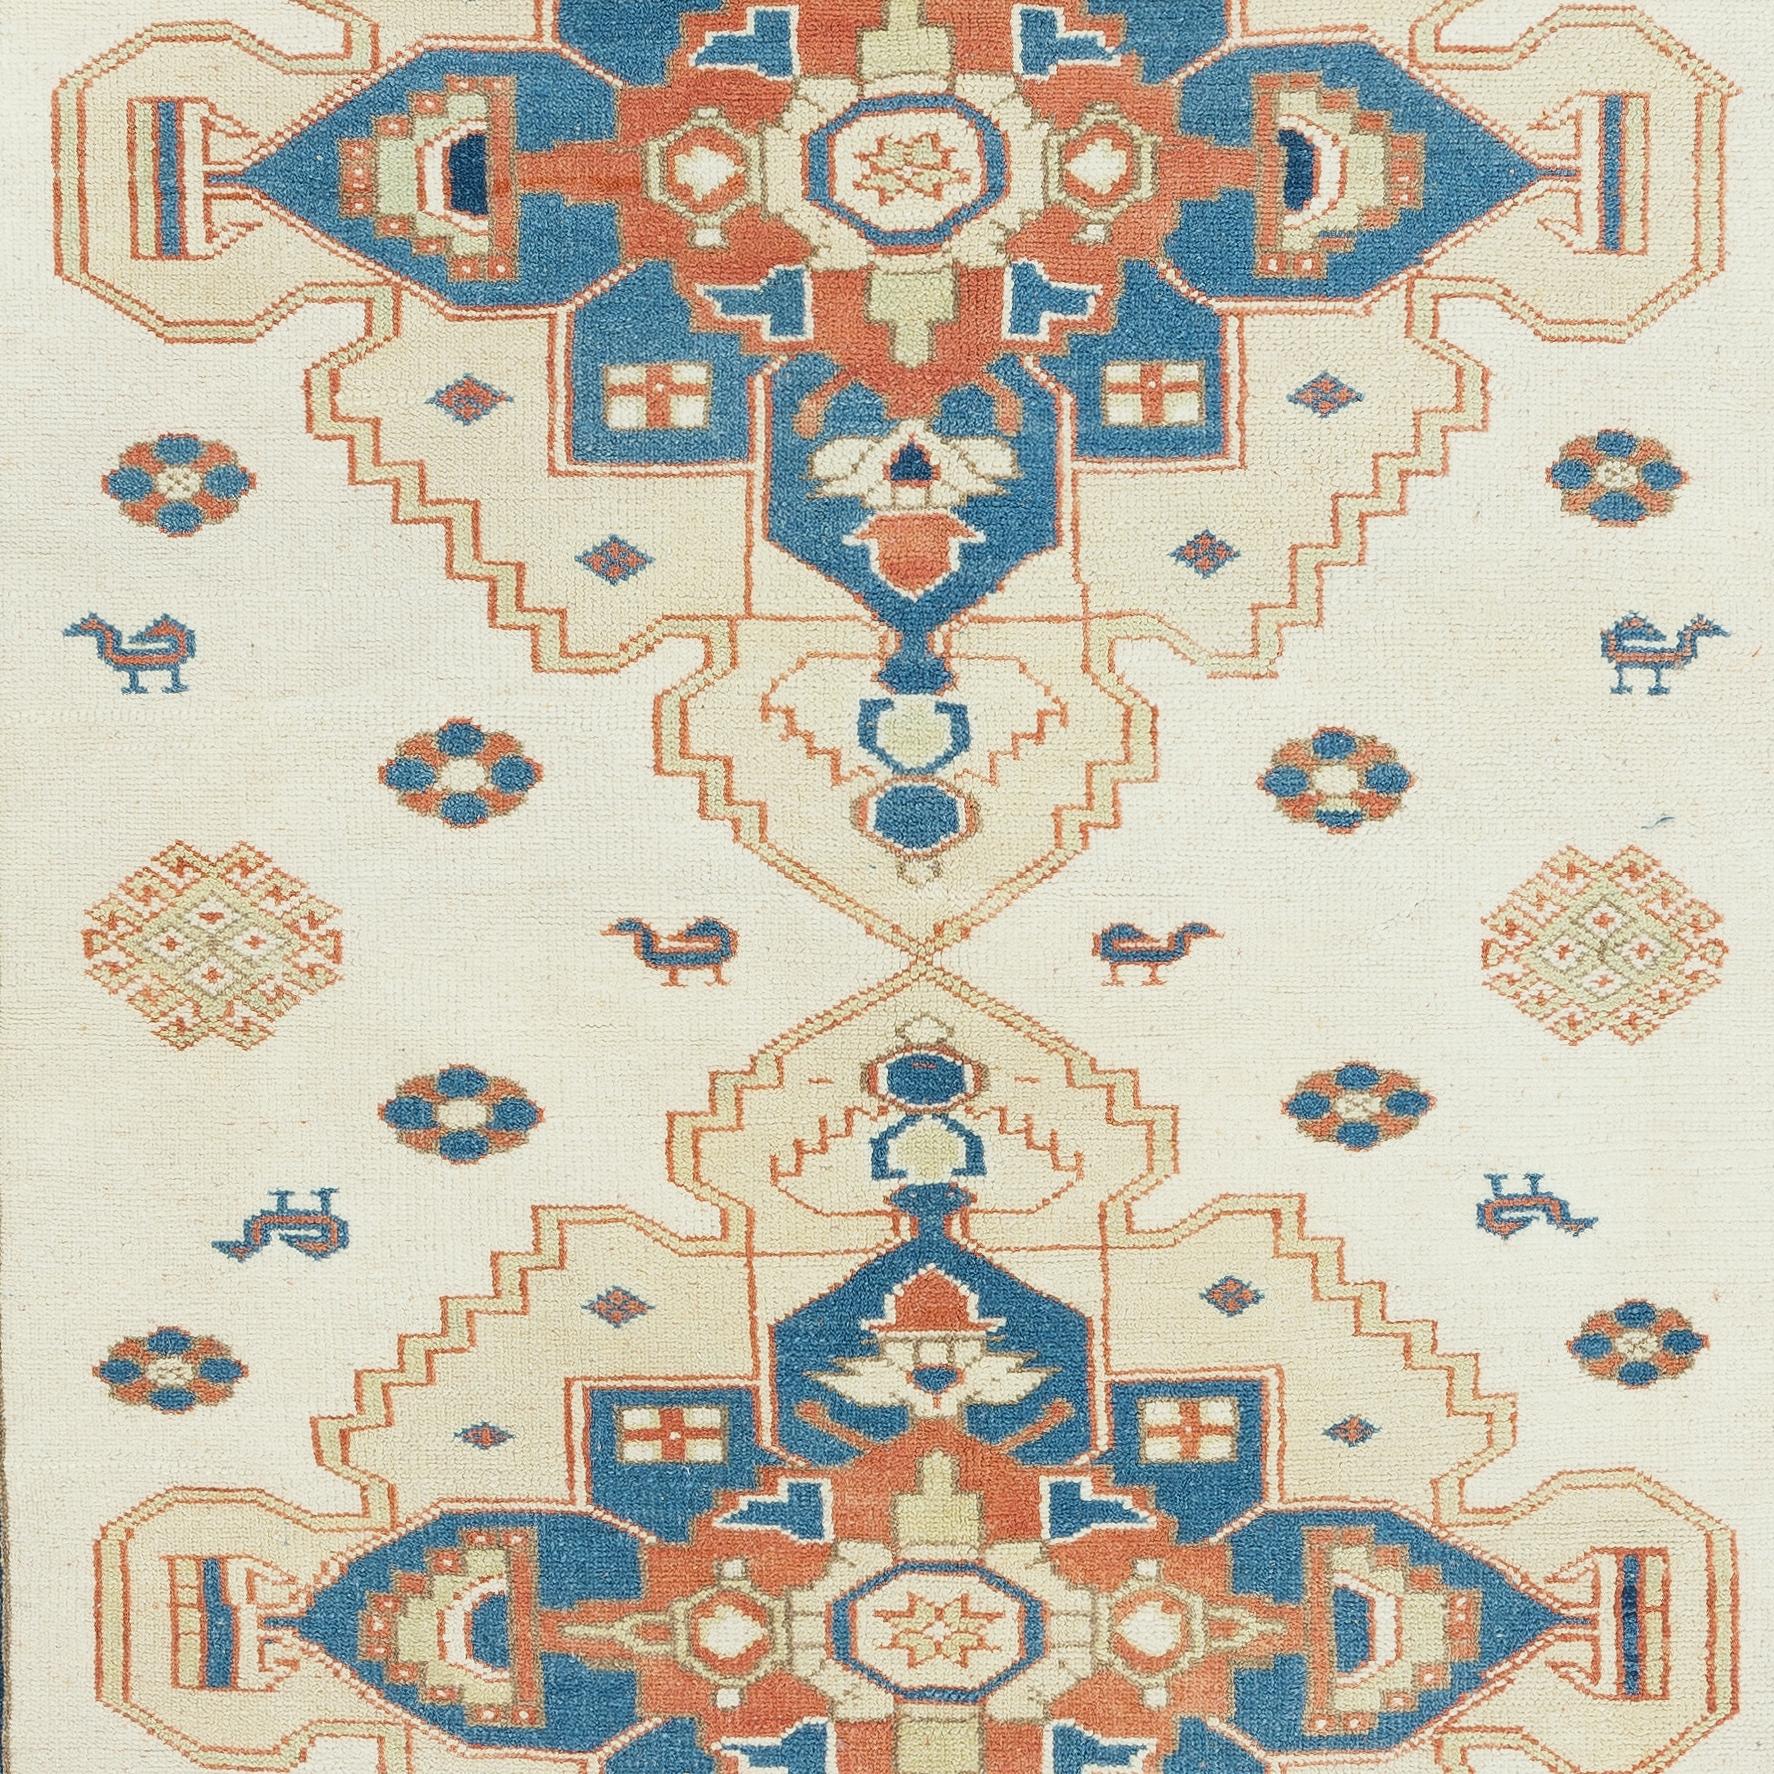 Hand-Knotted 4.6x6.3 Ft Vintage Turkish Wool Rug, Handmade Geometric Carpet in Beige and Blue For Sale